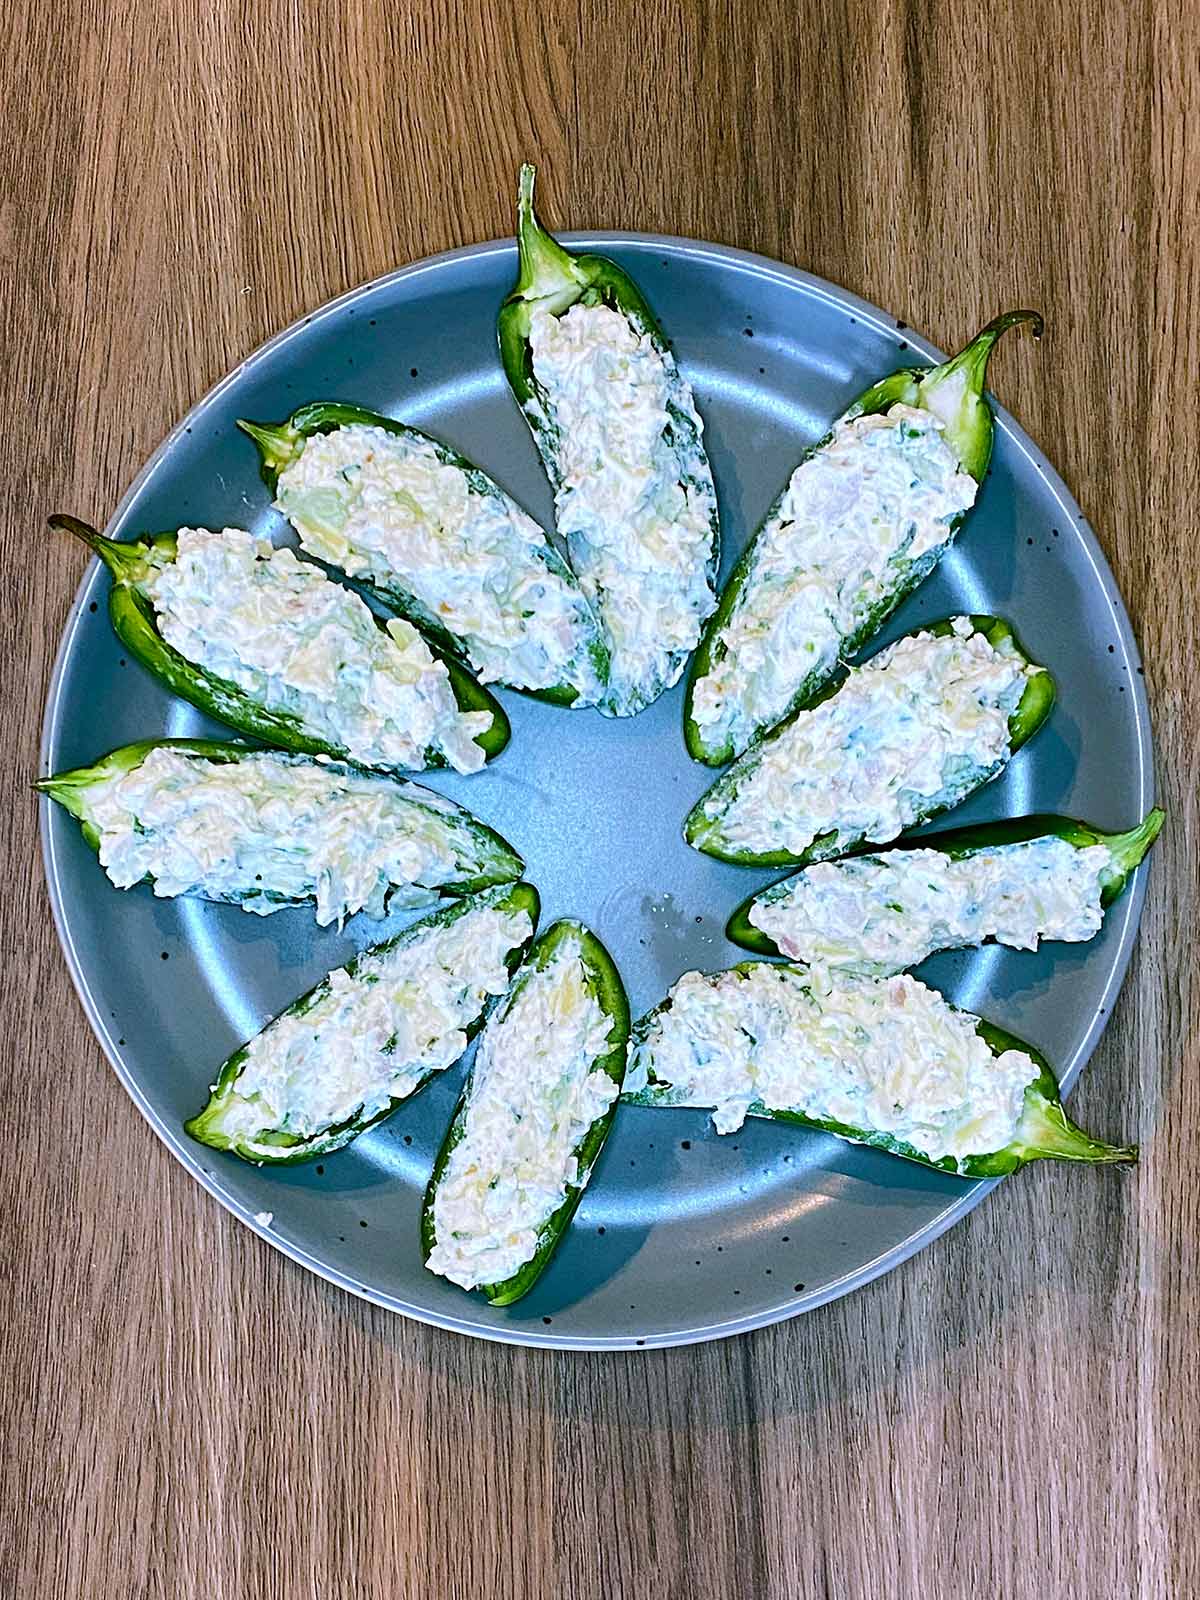 Ten jalapeno halves filled with cream cheese mixture.